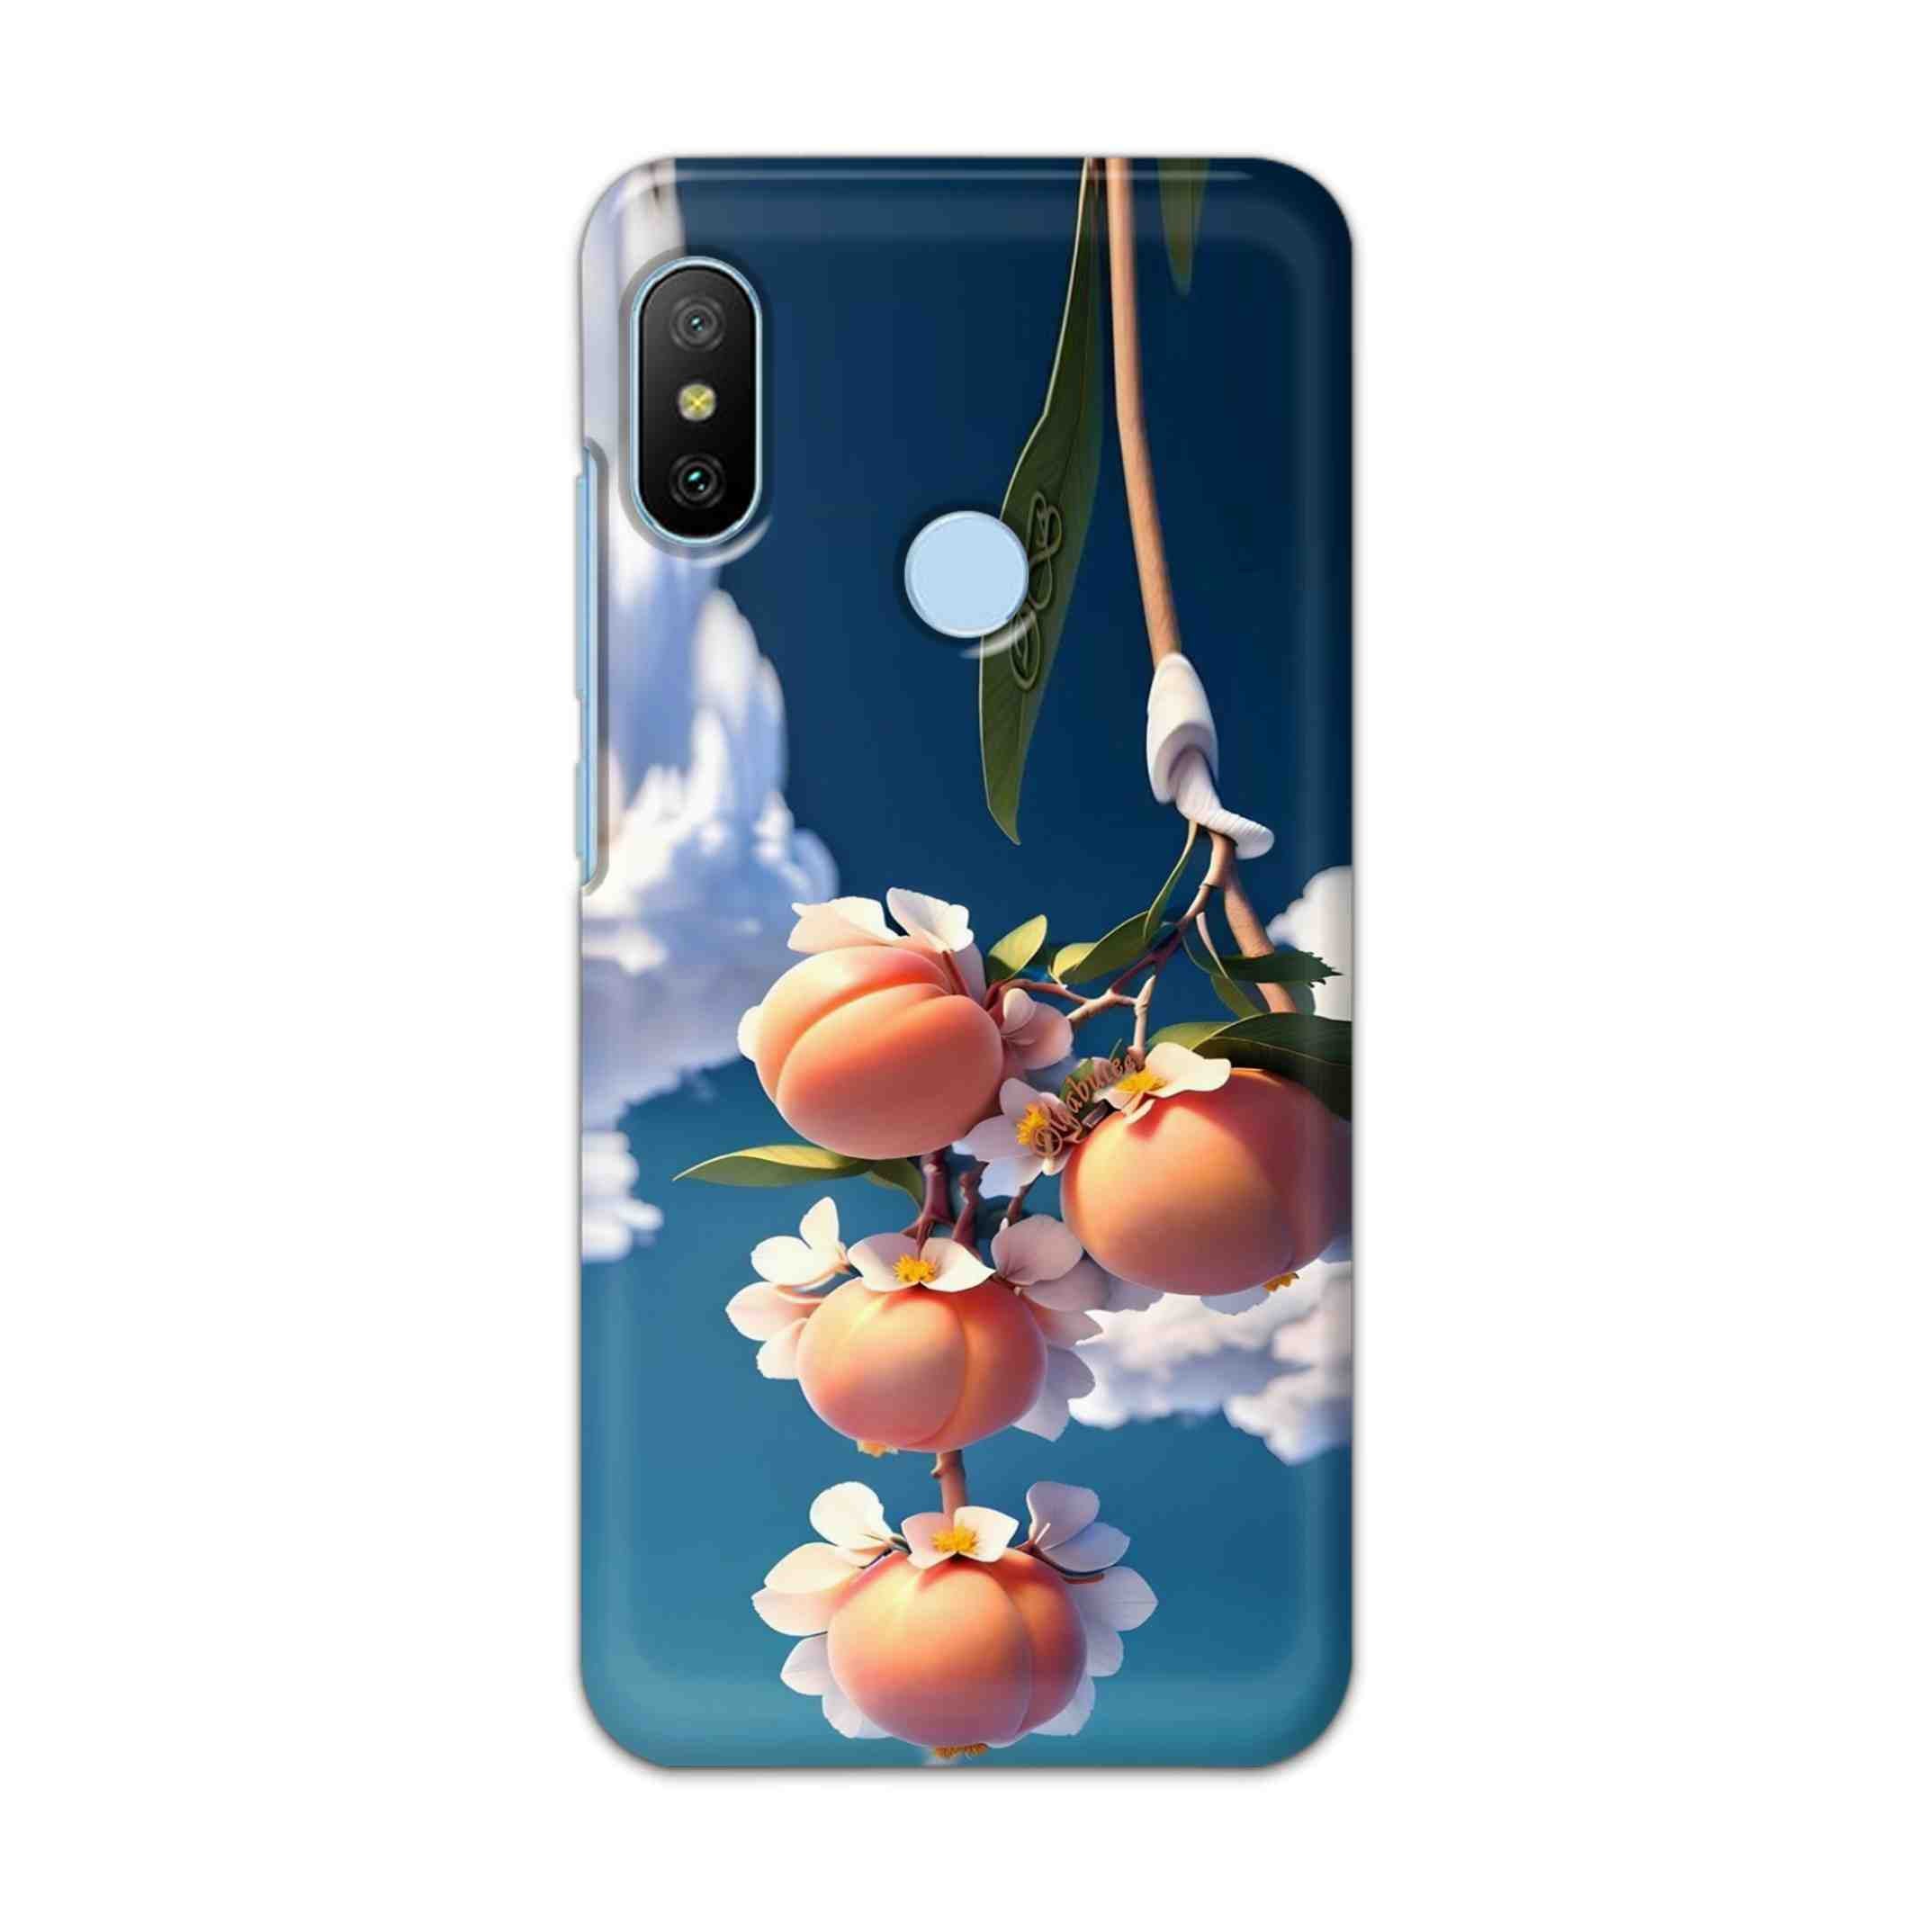 Buy Fruit Hard Back Mobile Phone Case/Cover For Xiaomi Redmi 6 Pro Online